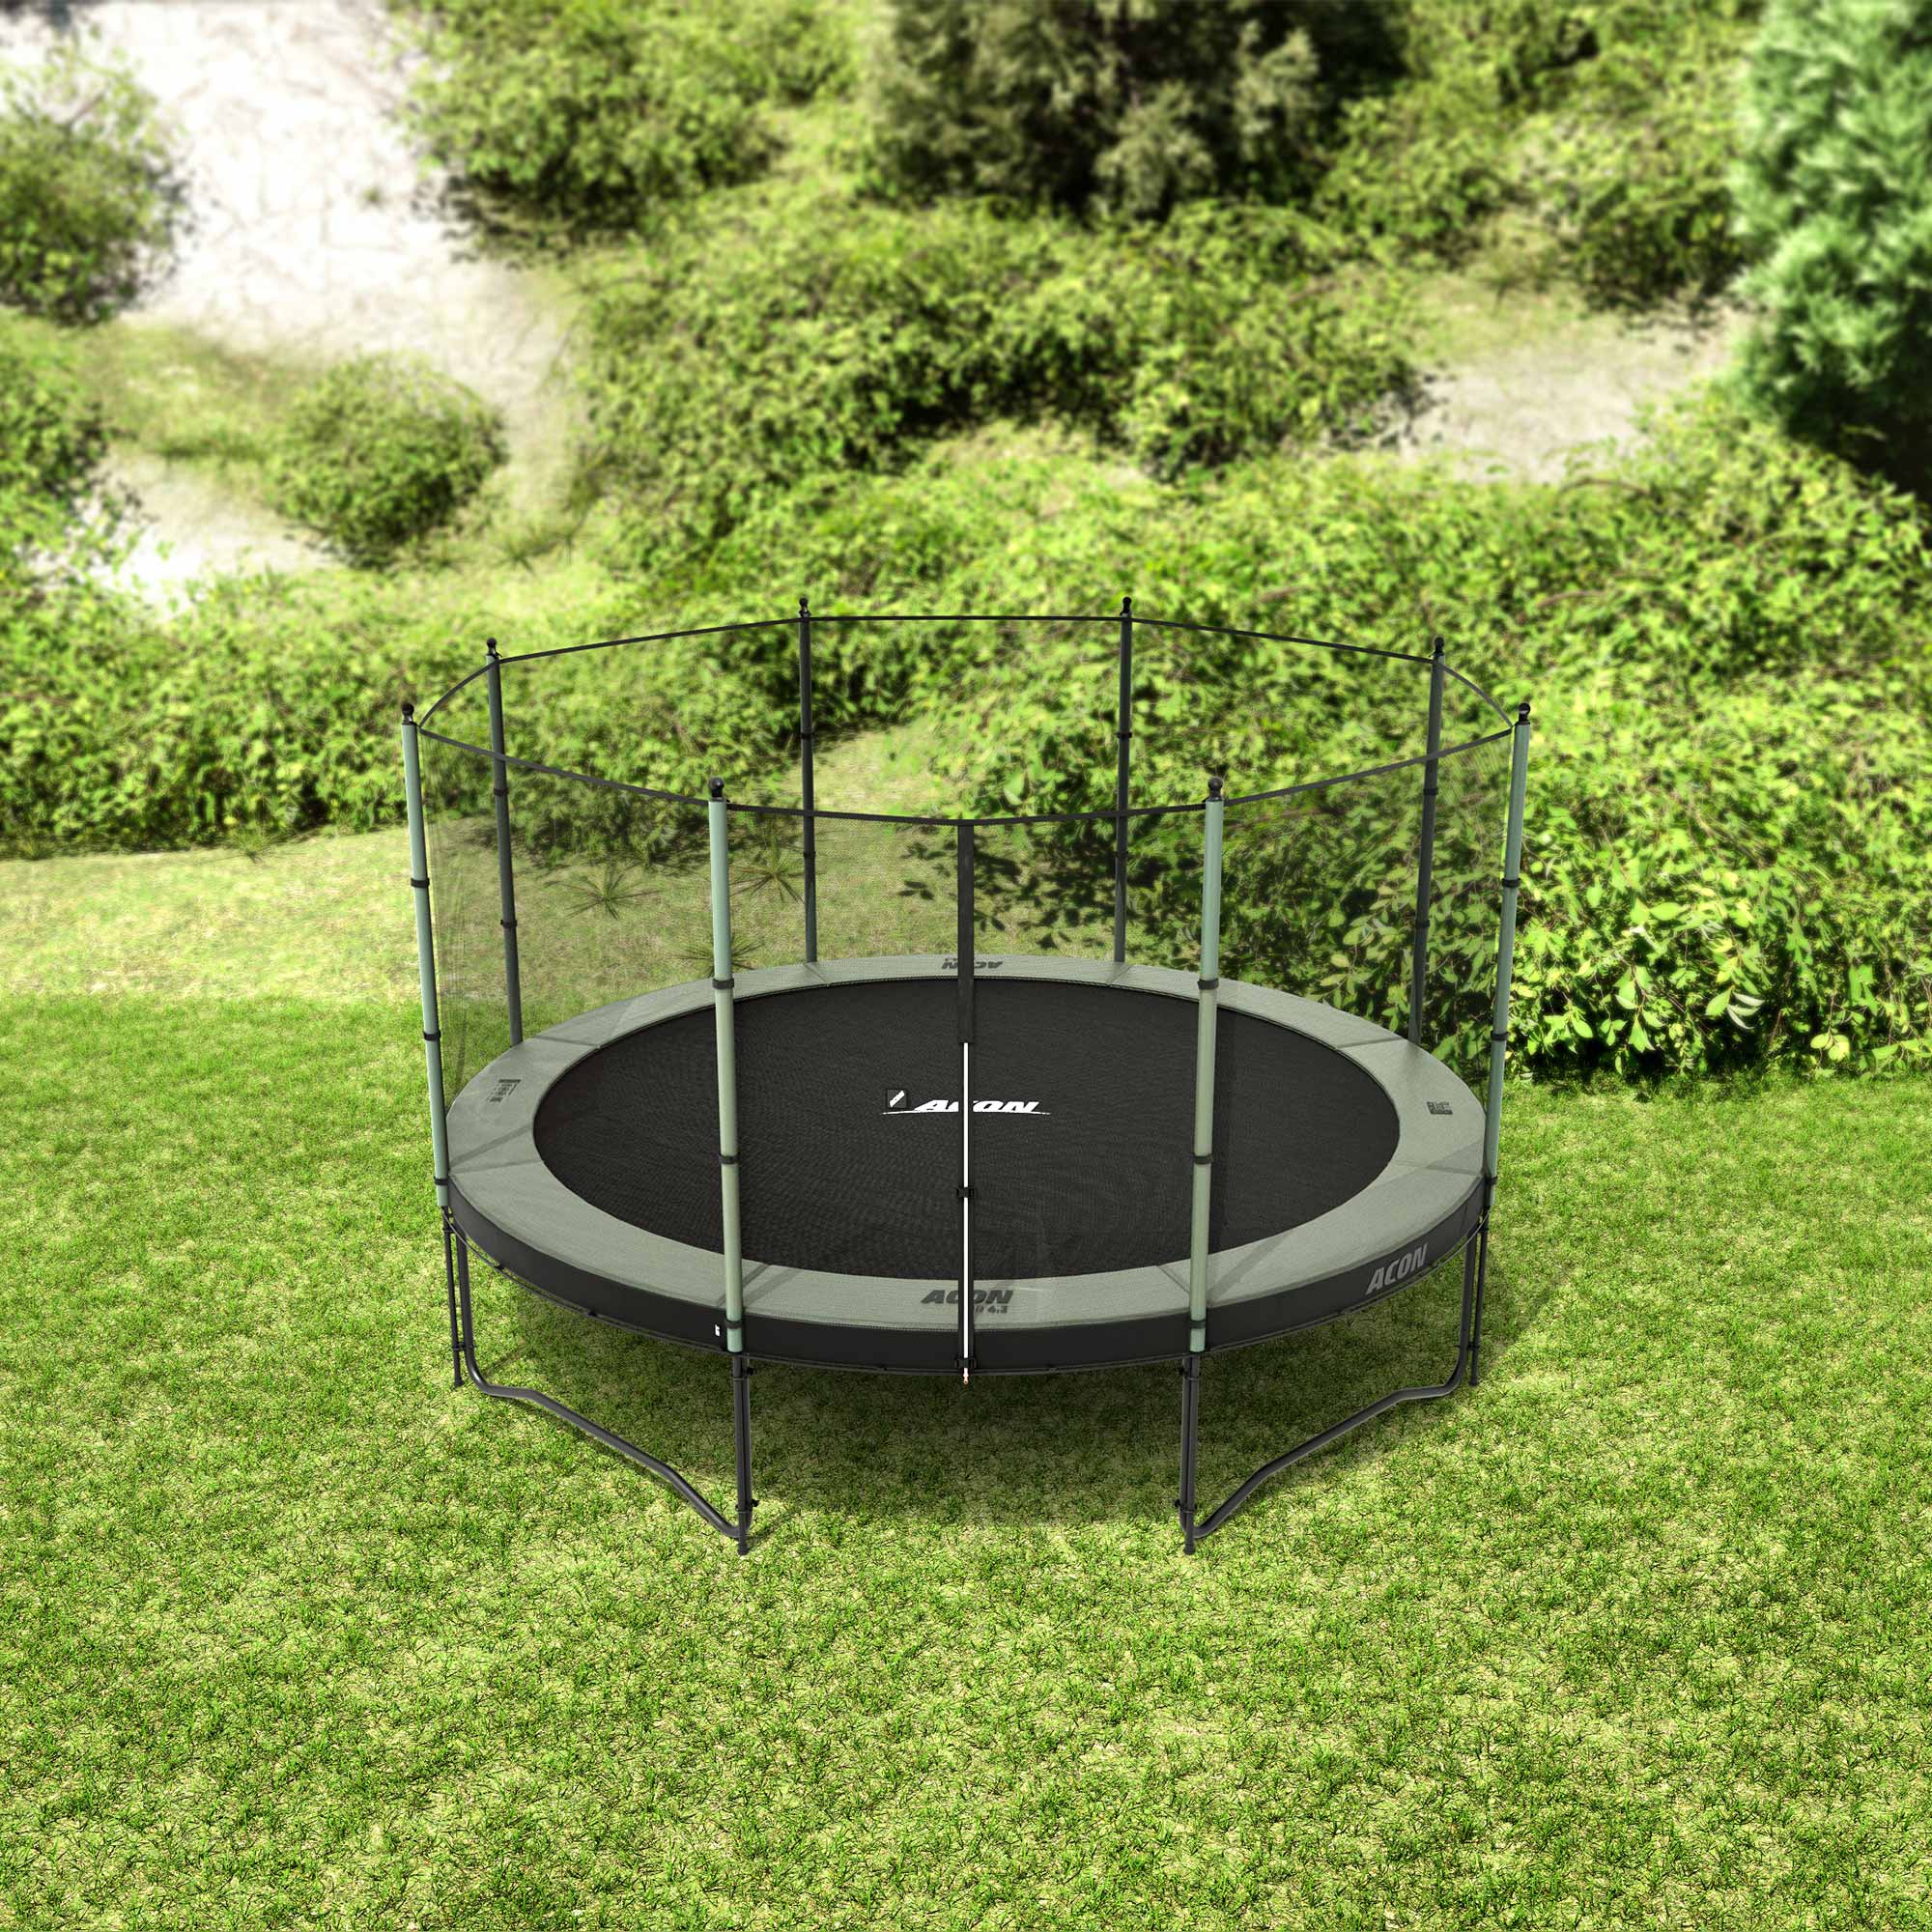 ACON Air 4,3m Trampoline with Standard Enclosure in the backyard.